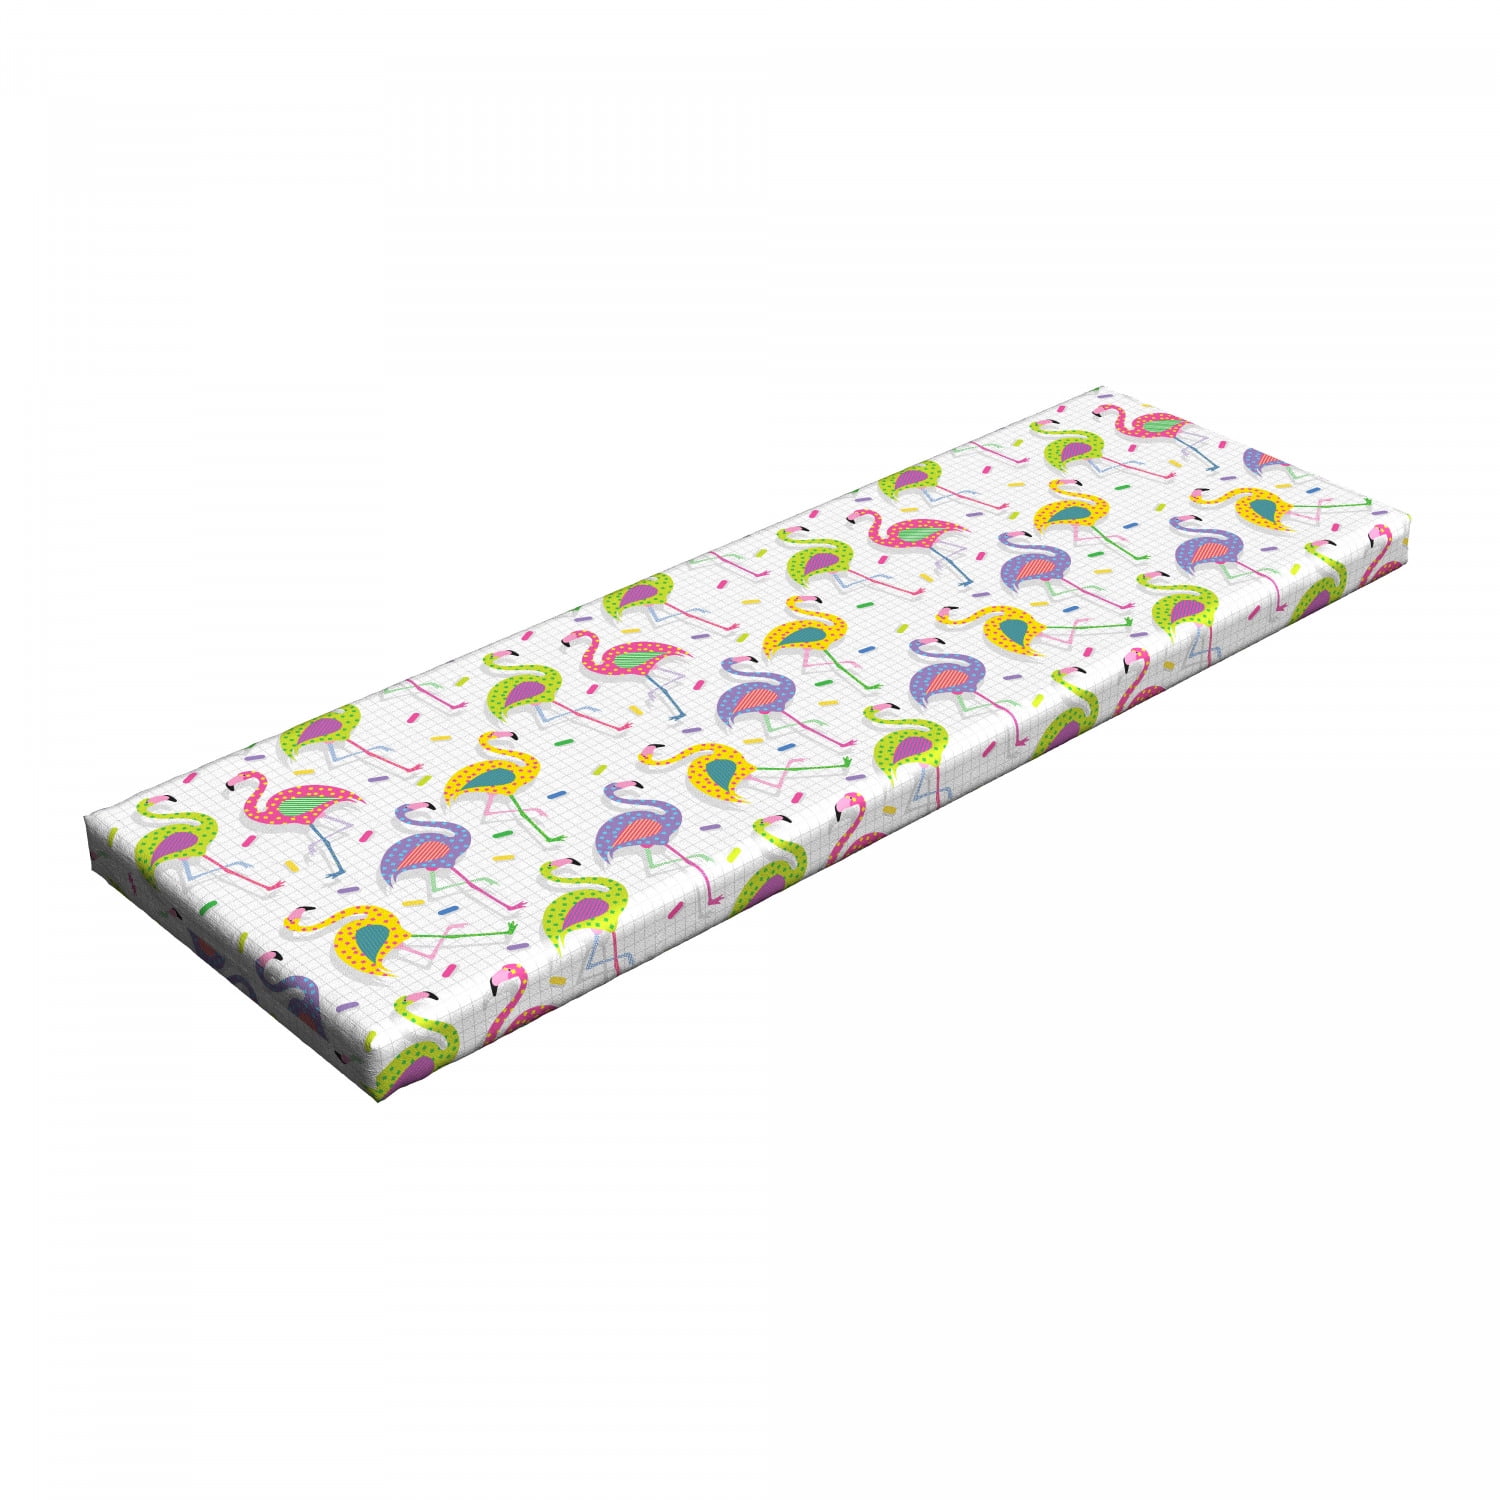 Zeeslak zonde Onderwijs Flamingo Bench Pad, Colorful Retro Vintage Flamingo Patterns in Polka Dot  Design Checked Background, HR Foam Cushion with Decorative Fabric Cover,  45" x 15" x 2", Multicolor, by Ambesonne - Walmart.com